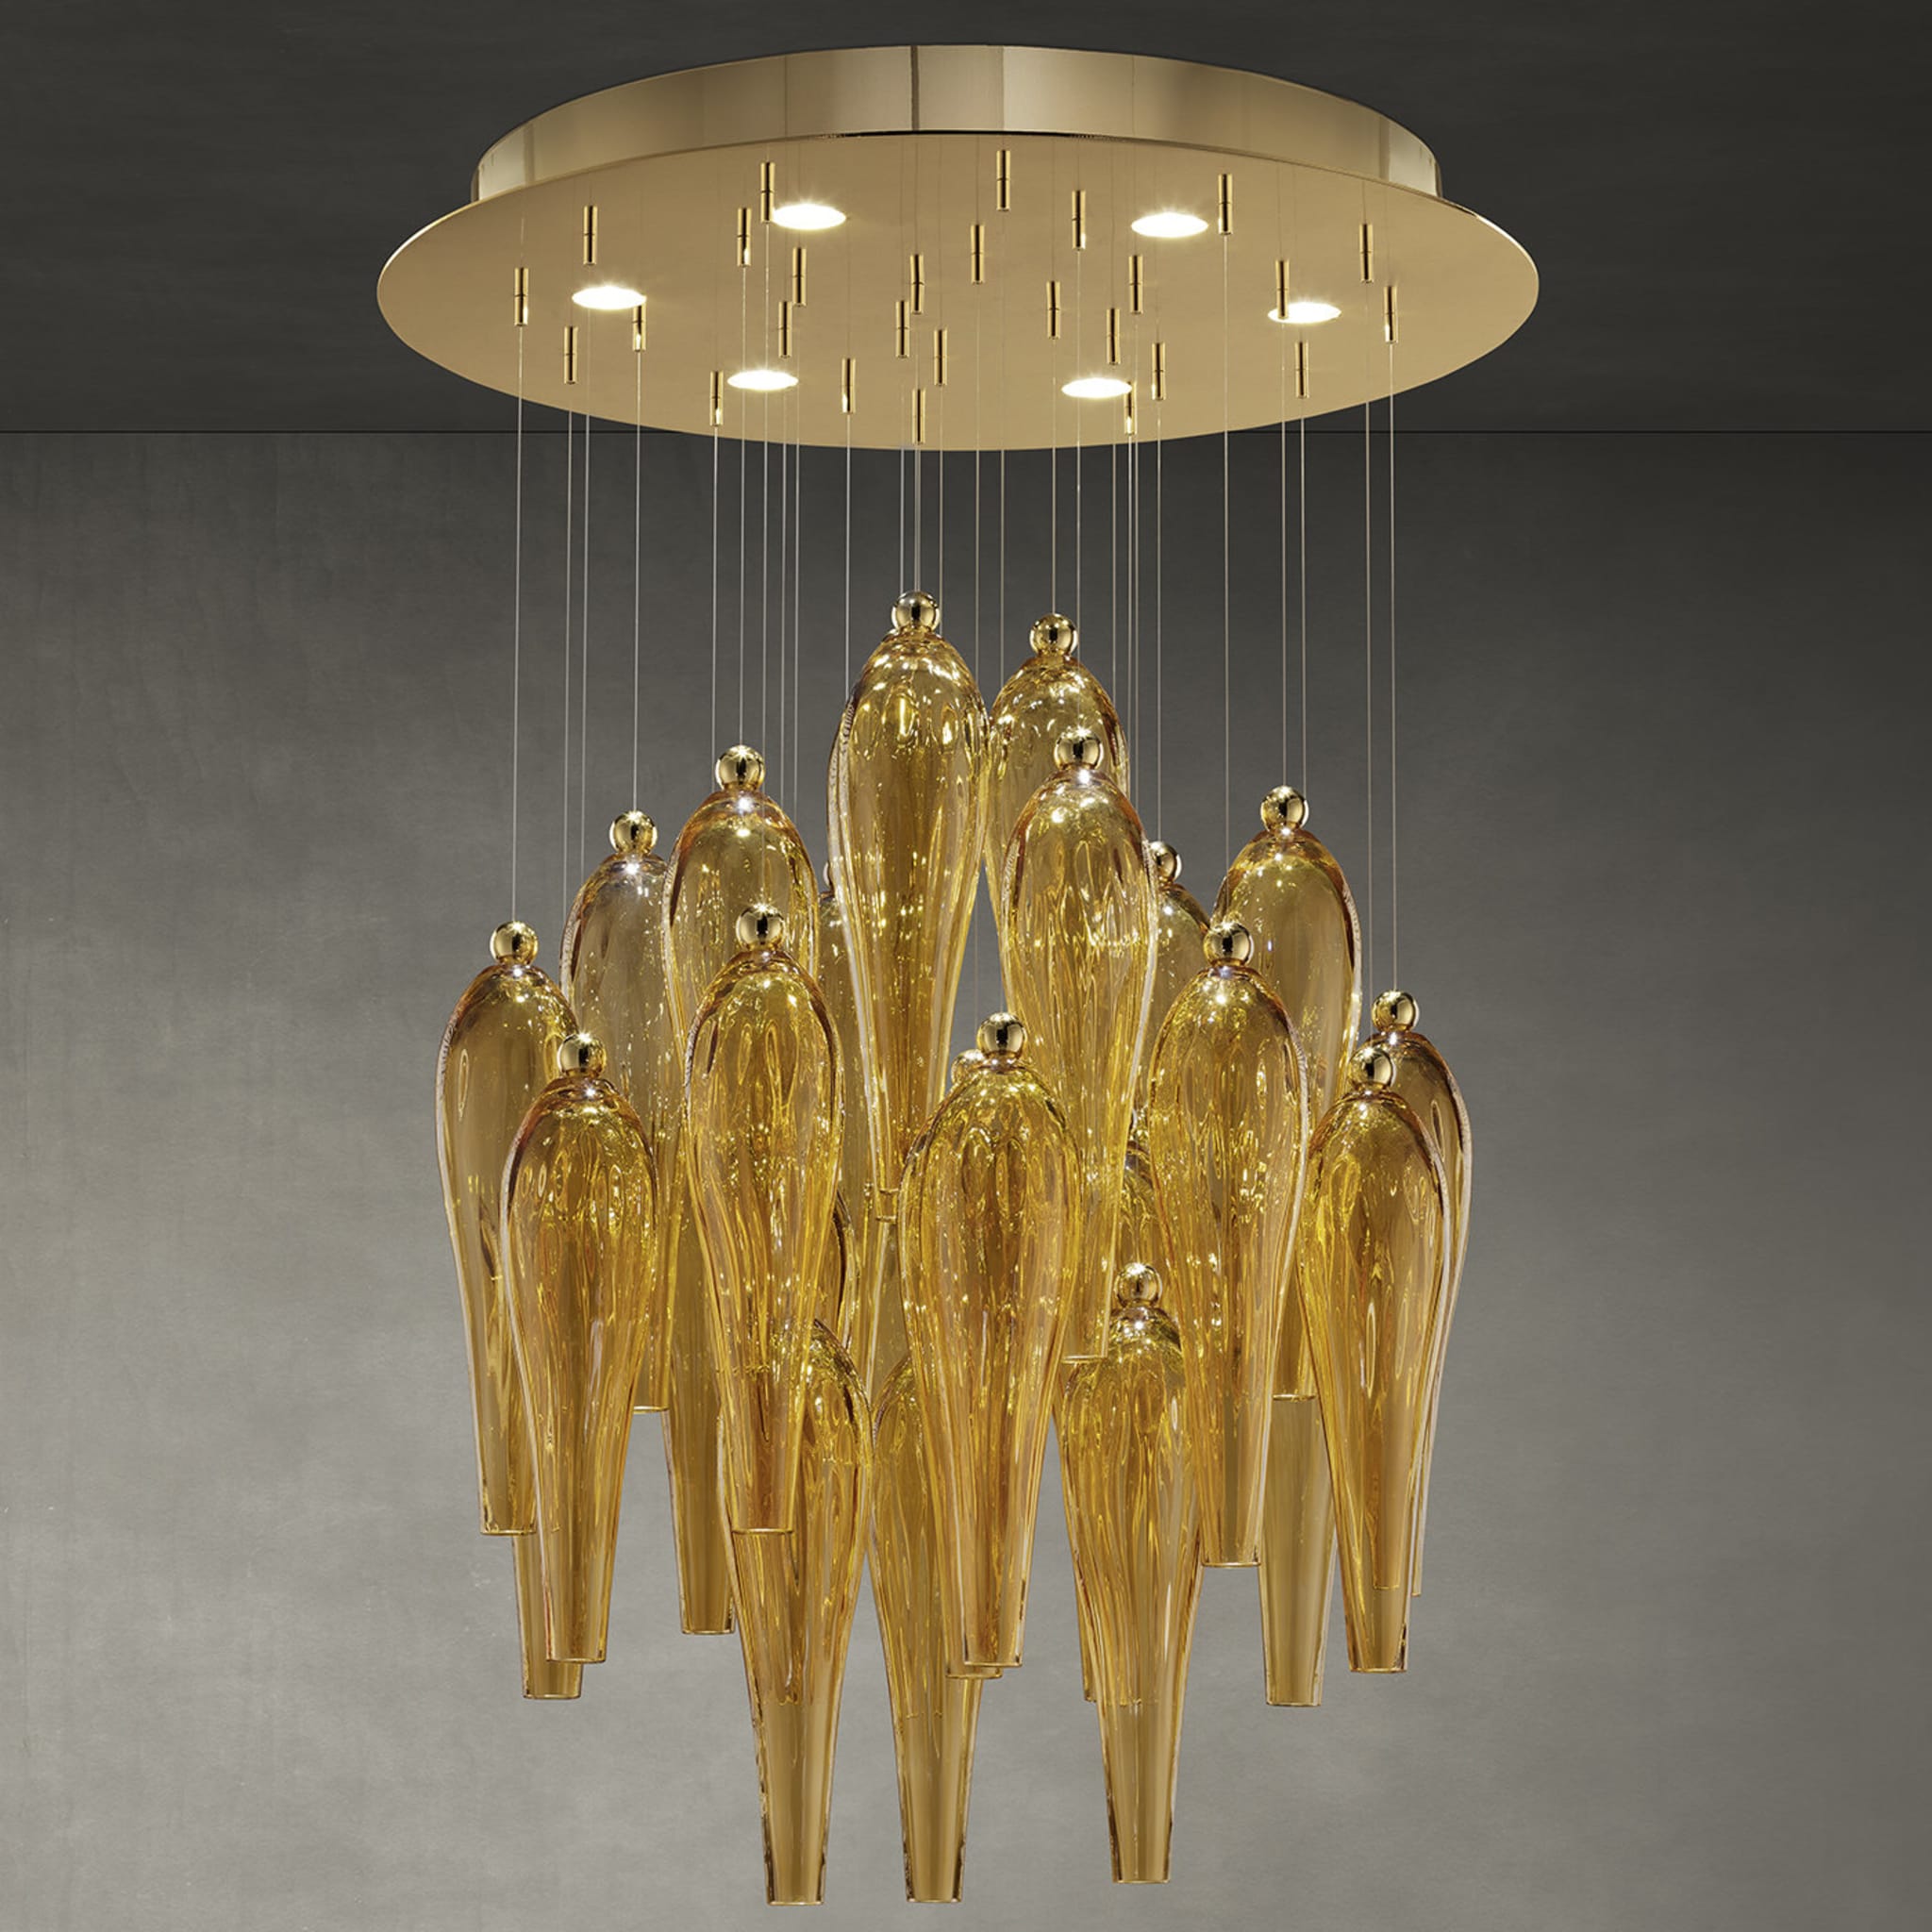 Abstract Amber Chandelier - Alternative view 1